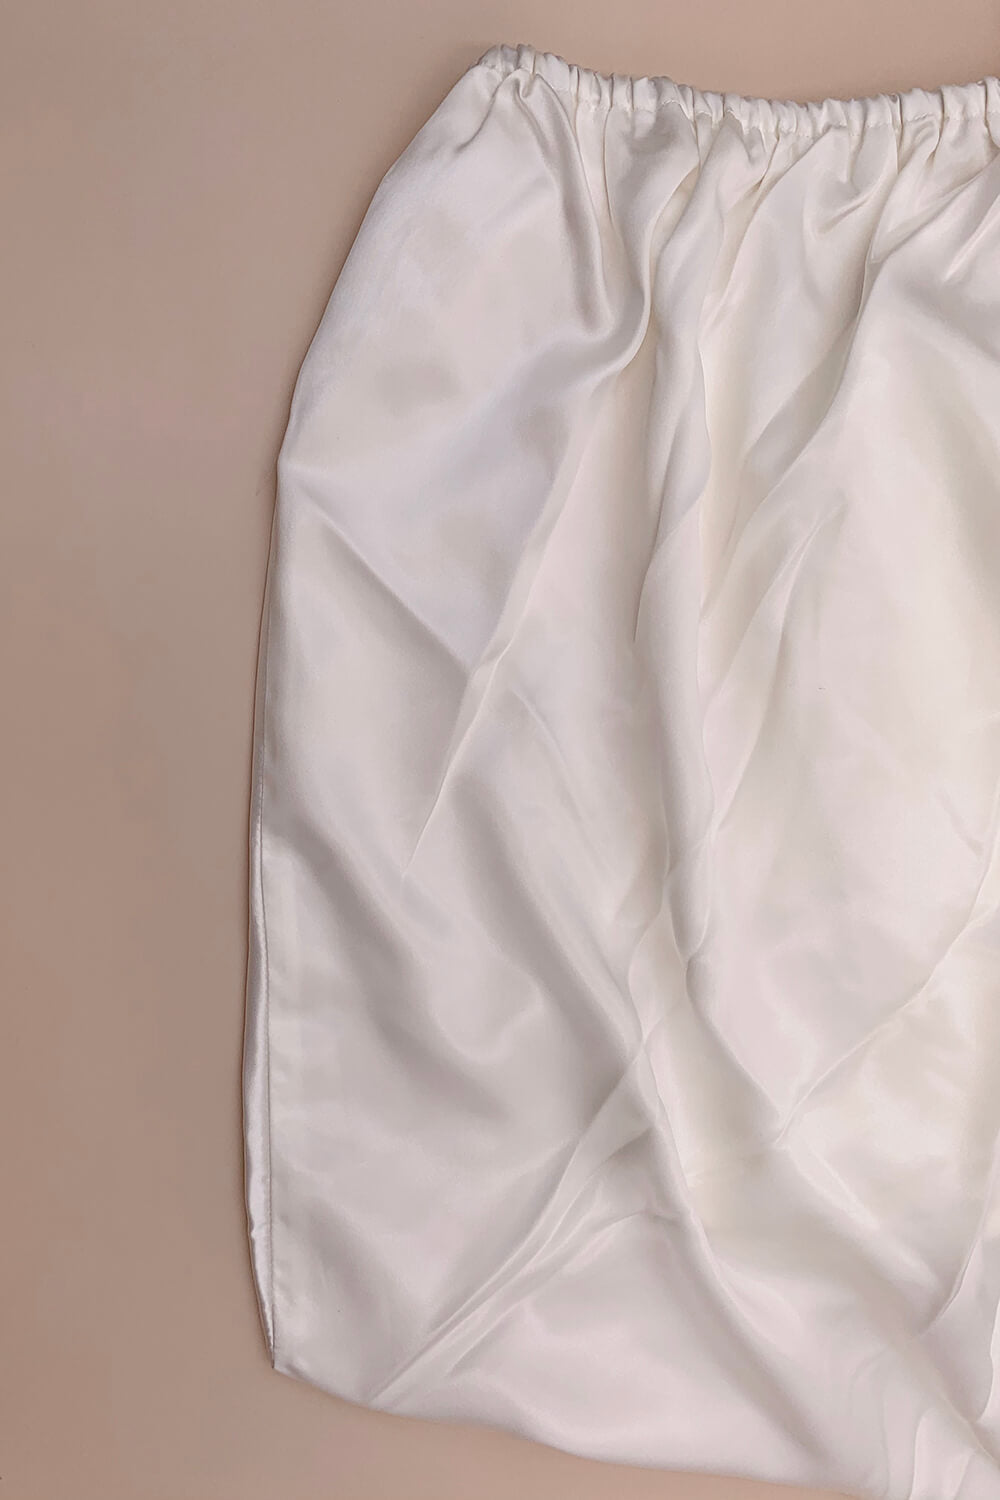 Silk Bed Sheets - Pearl White - BASK ™